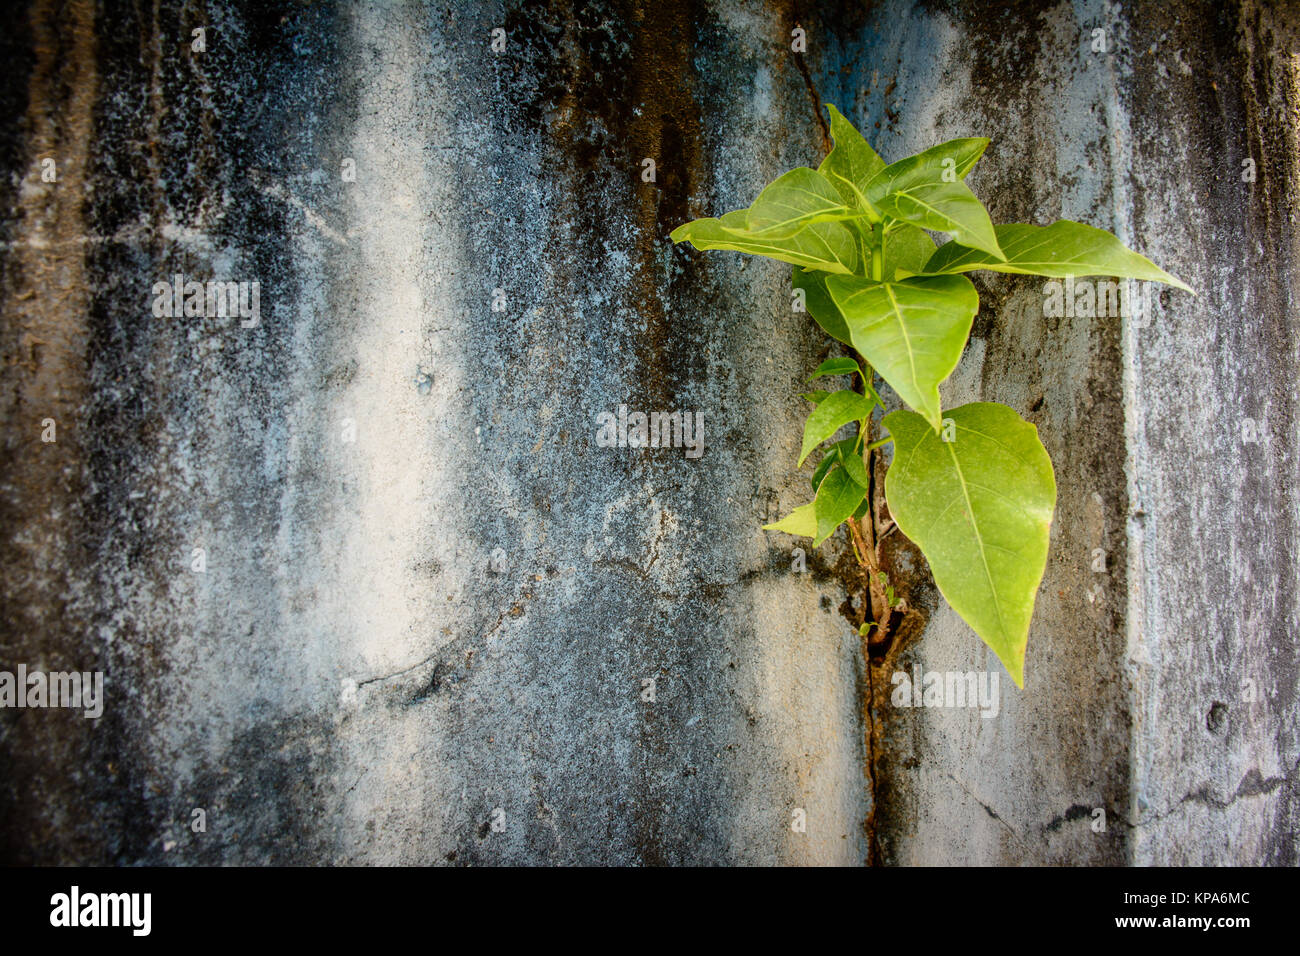 small banyan tree is growing on the wall Stock Photo